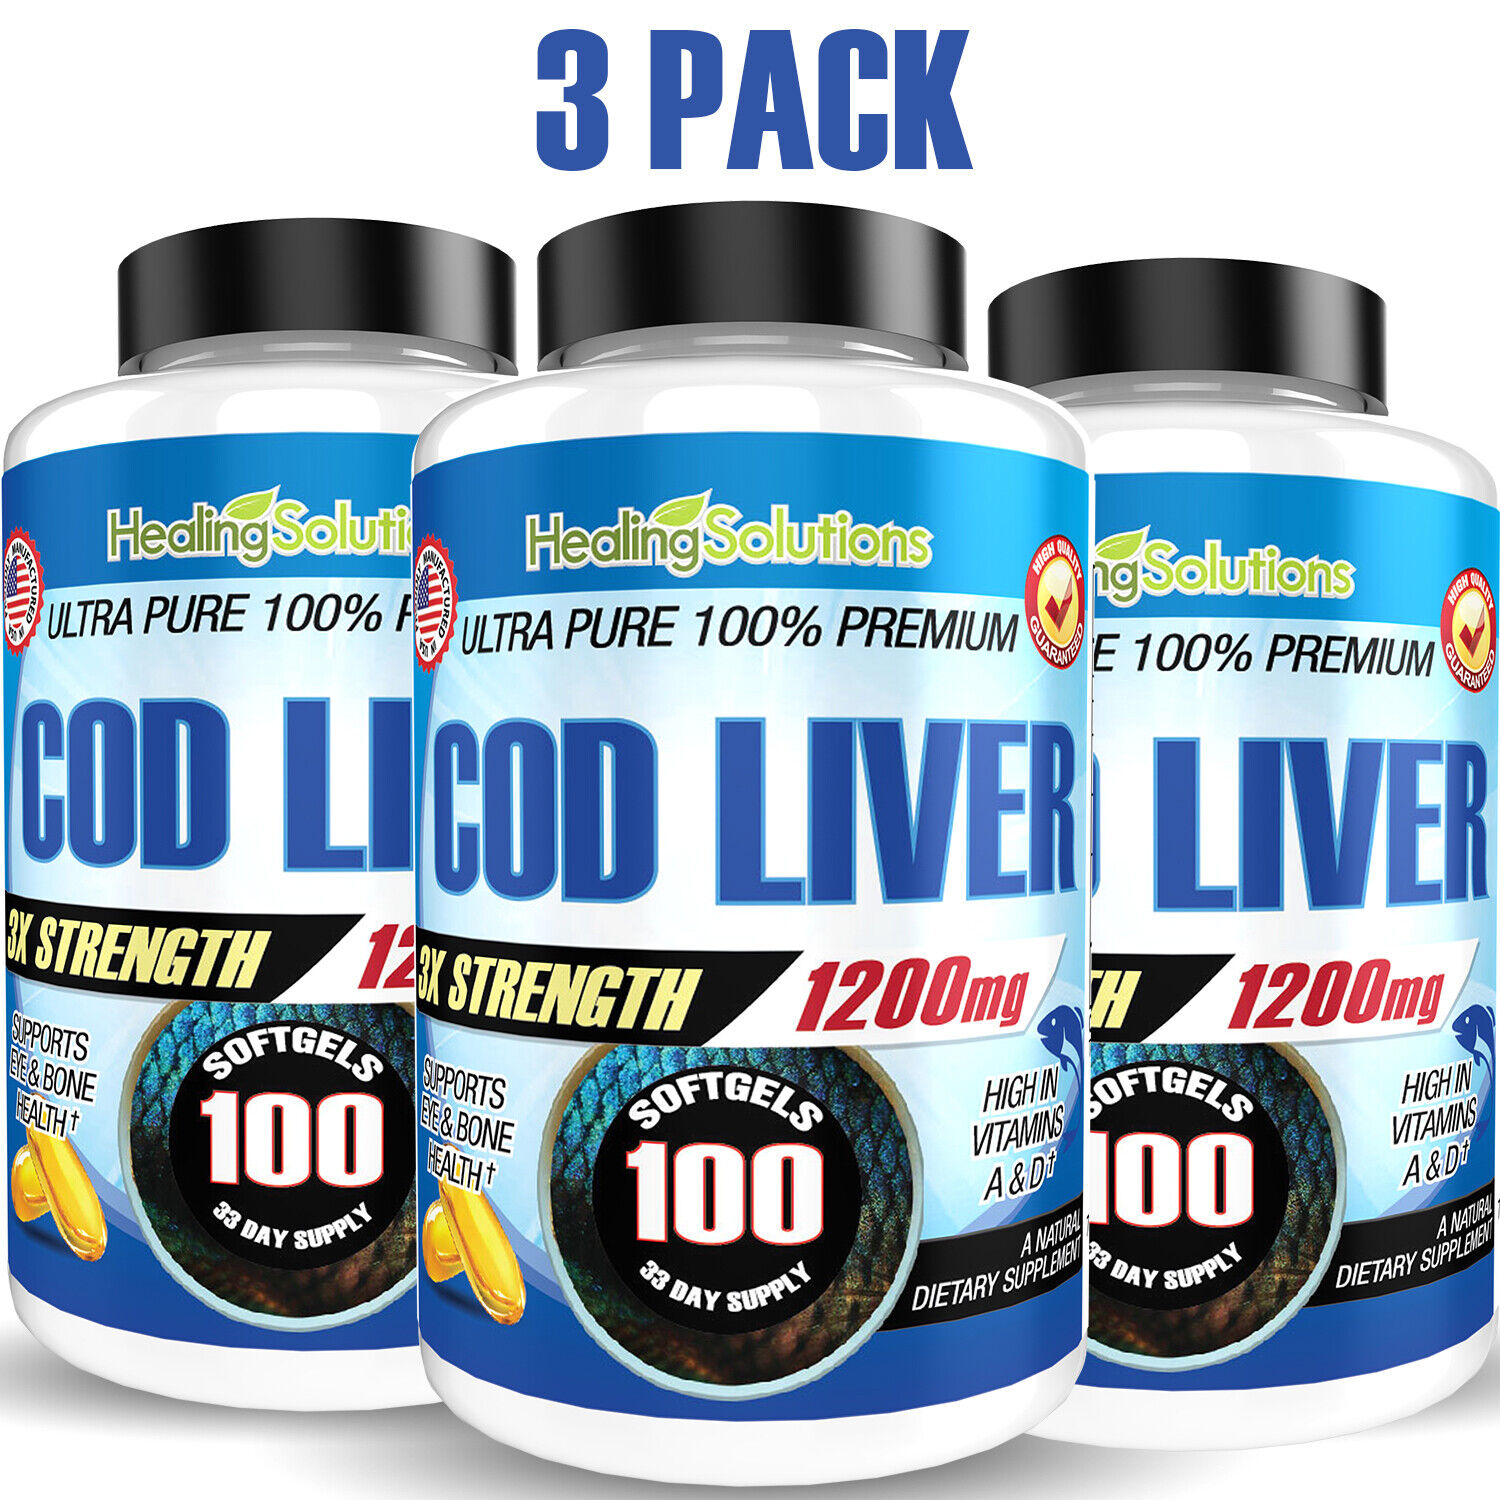 Cod Liver Oil Omega 3 Non Fermented 1200mg Joint Pain Relief - XL100ct - 3 PACK